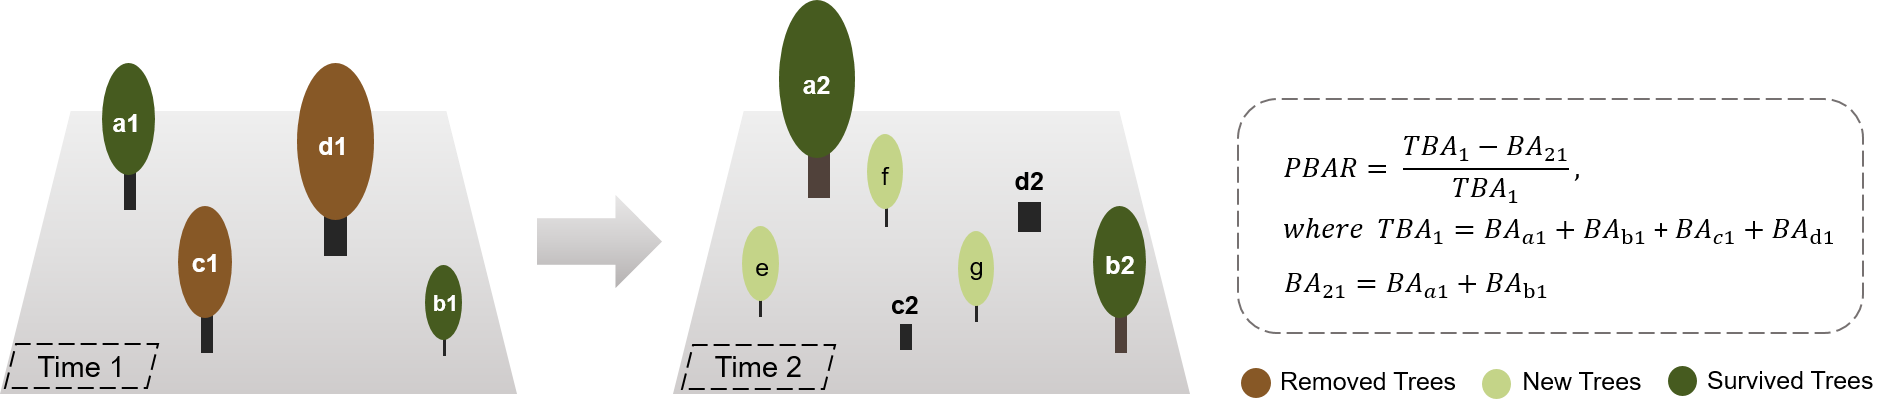 Illustration of forest change due to basal area loss and gain